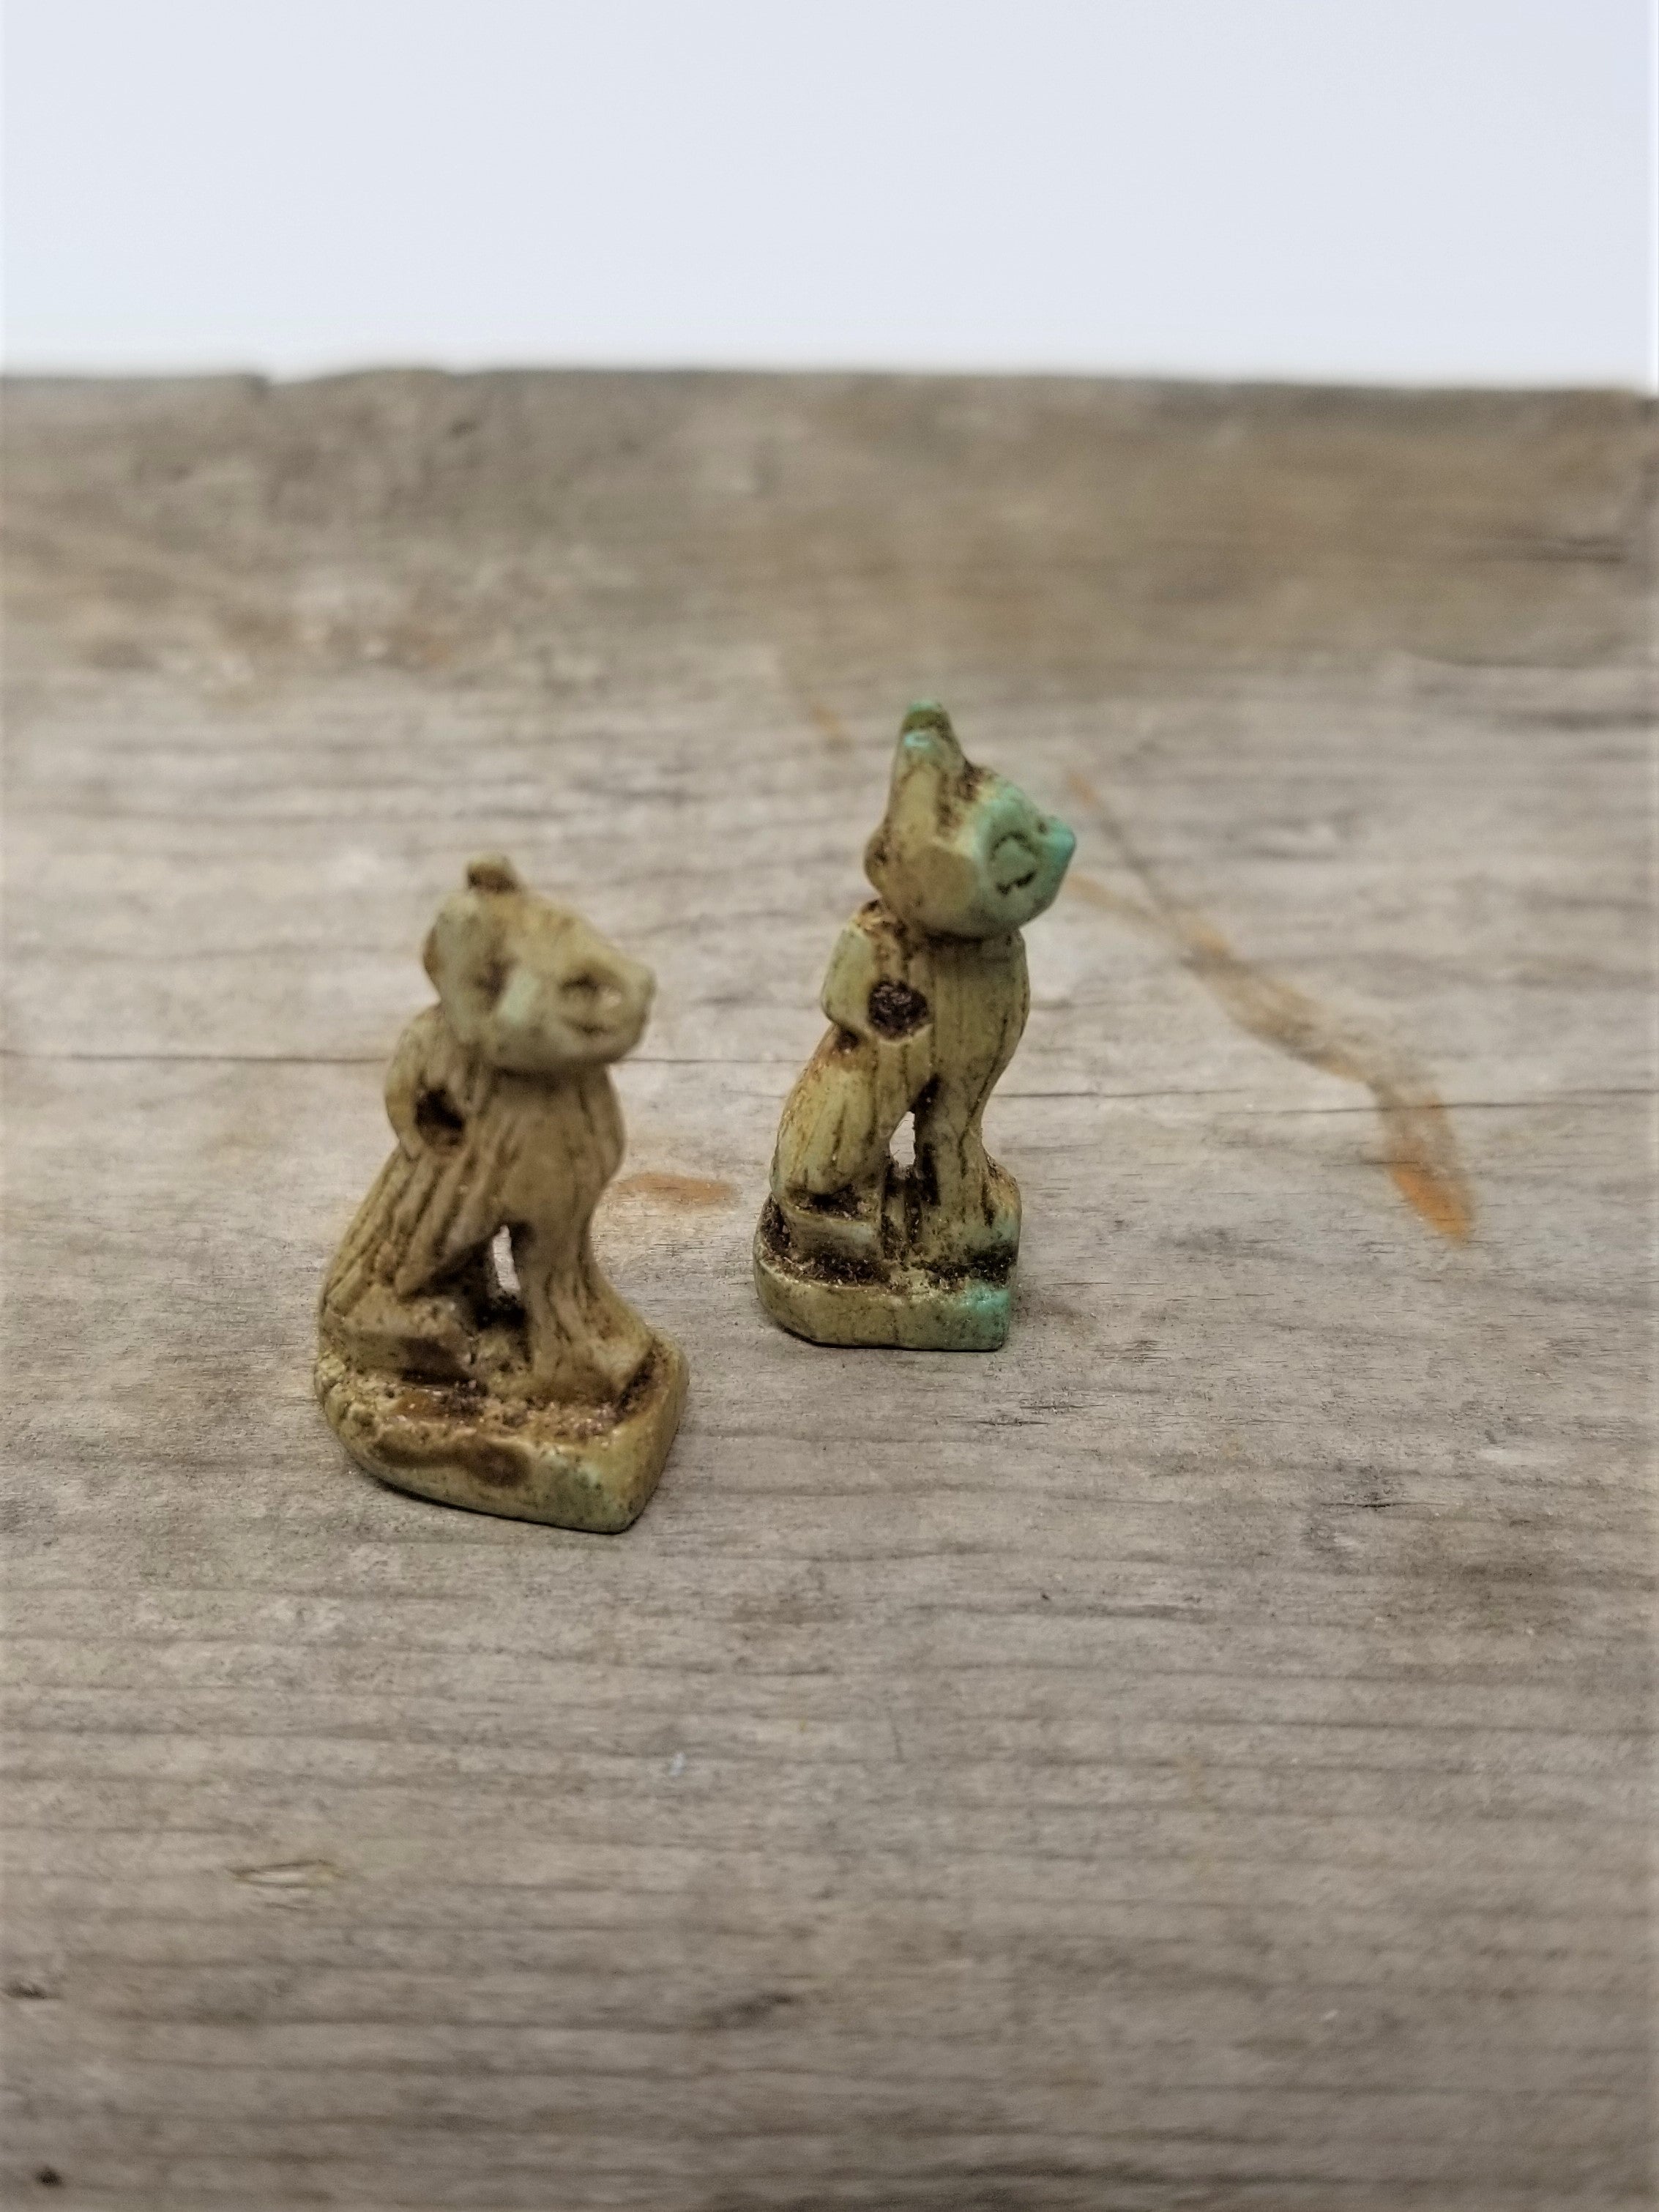 Sacred vintage cat beads from Egypt